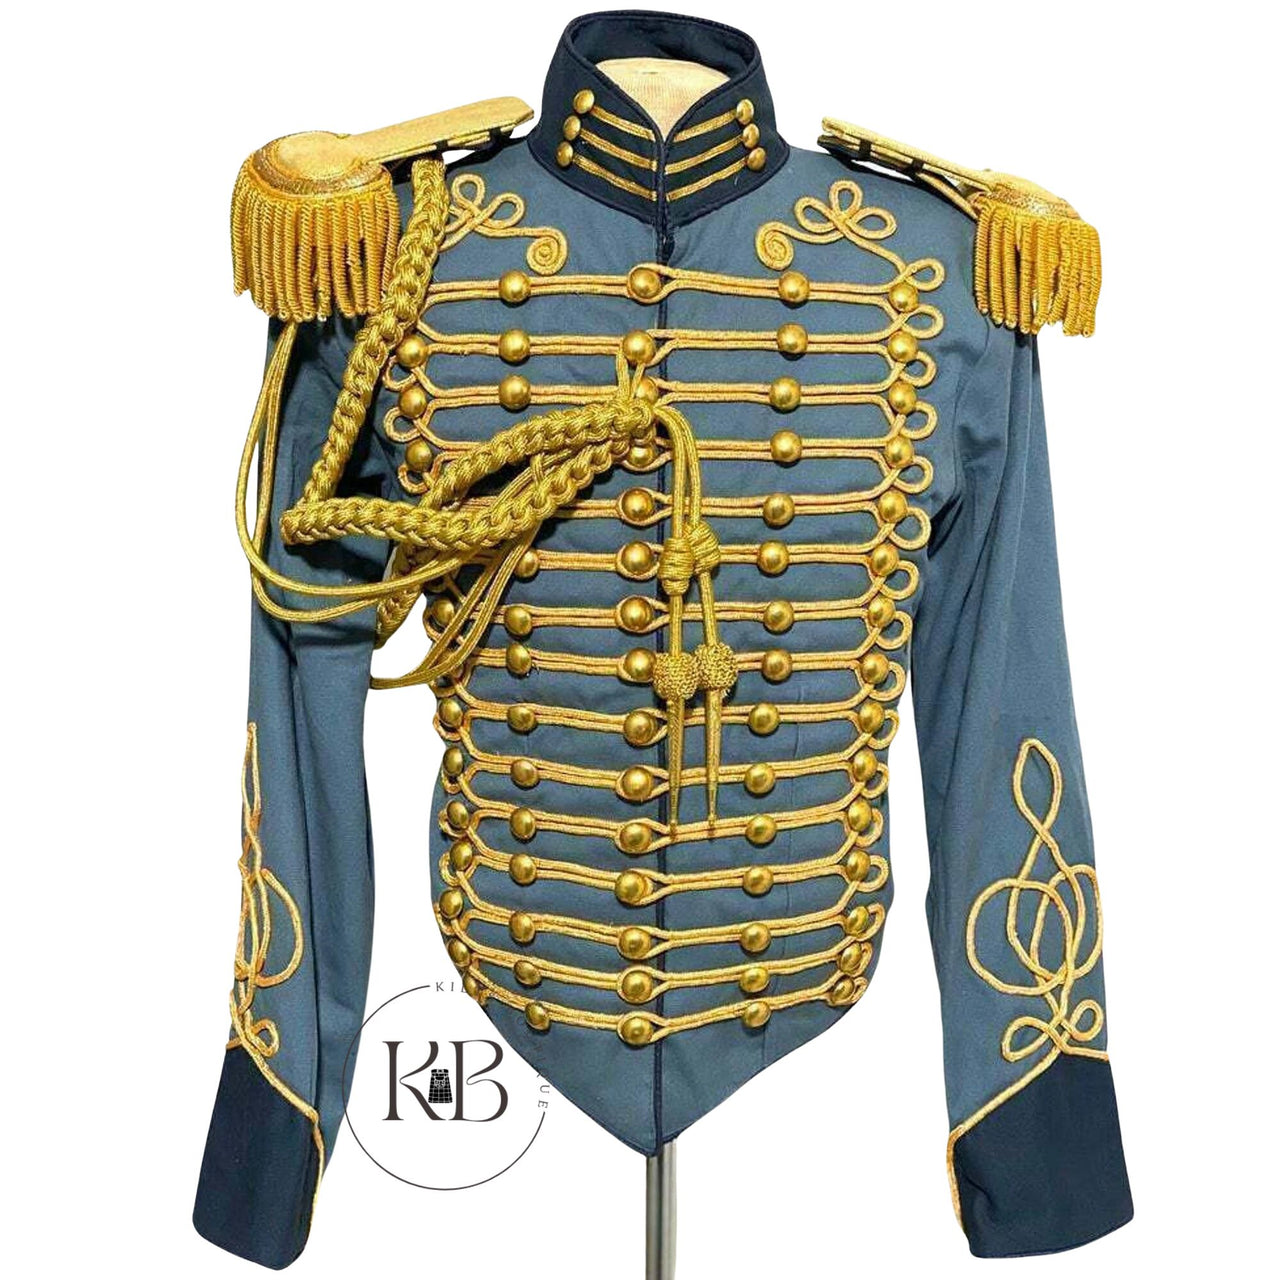 Historical American Civil War Gold Braiding Hussar Officers Jacket With Gold Aiguillette Costume